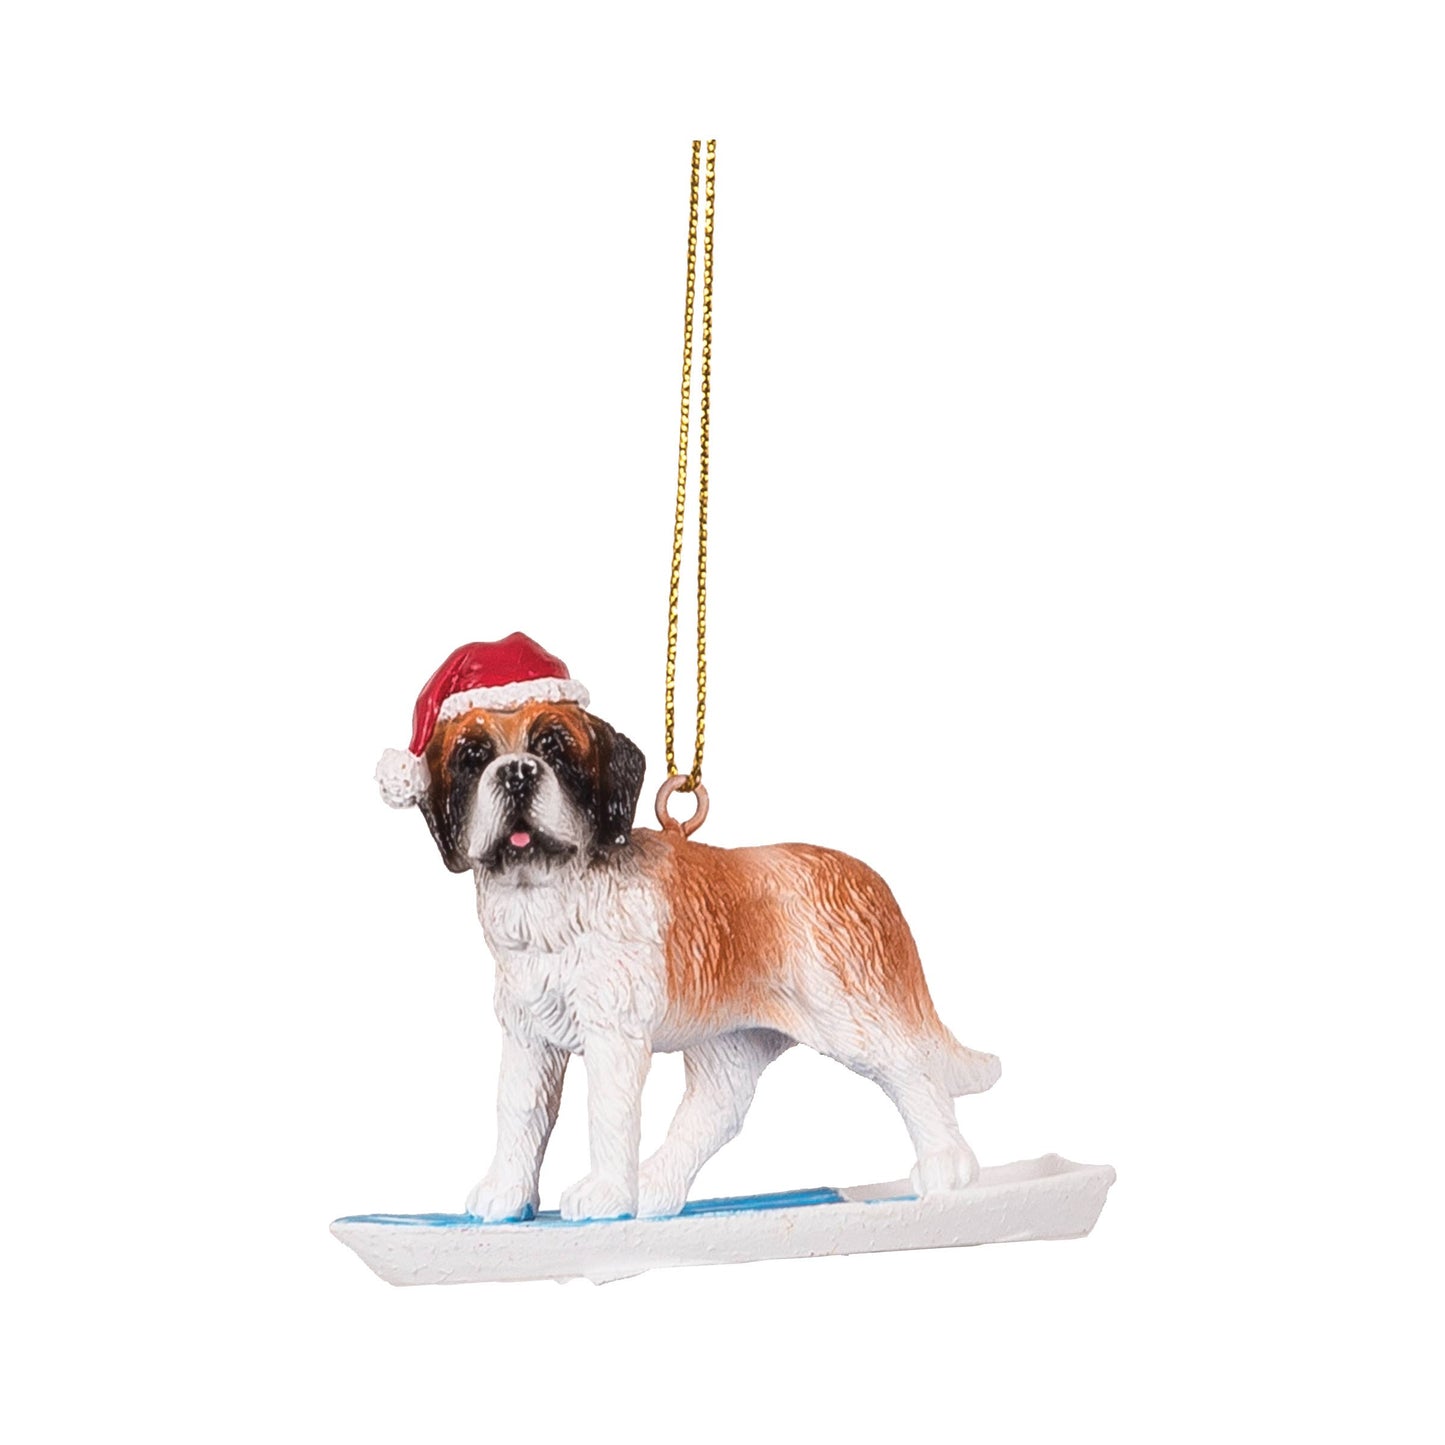 Dog Surfing With Santa Hat Ornament